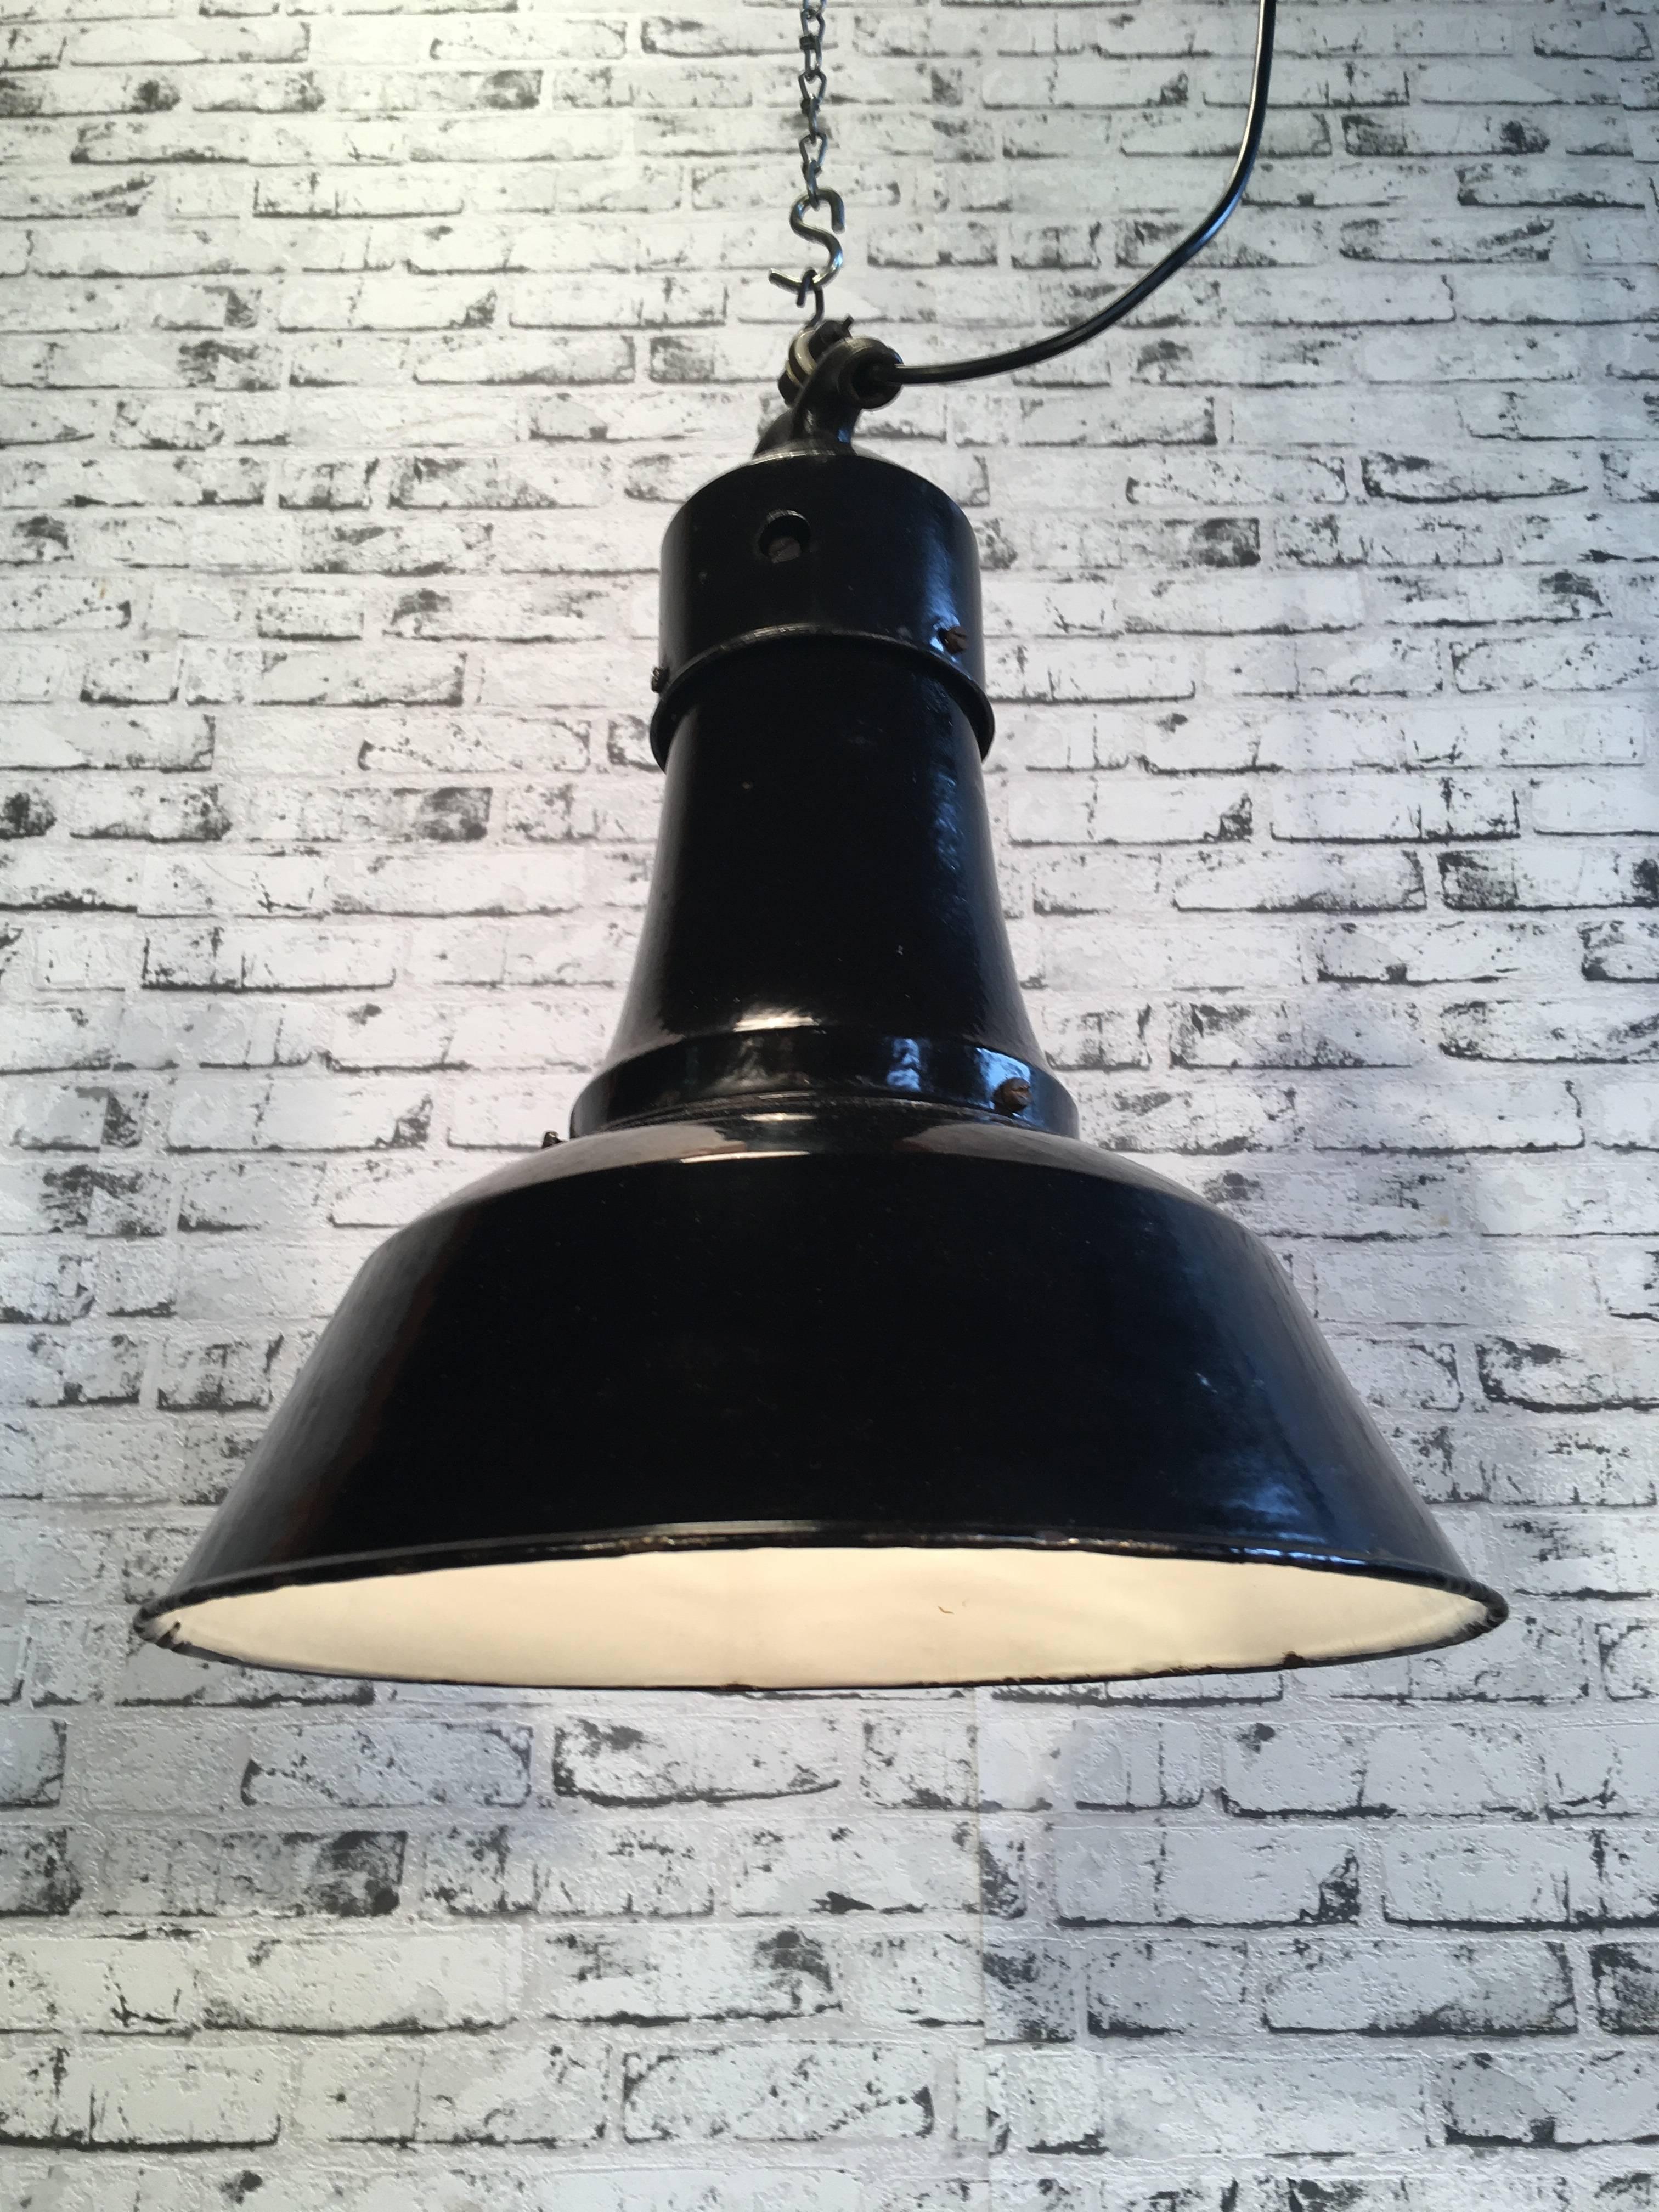 This rare very old industrial lamp comes from the 1925 factory. Lamp has black enamel exterior, white interior. Cast iron top. New porcelain socket E 27 and wire. Weight 2.5 kg.